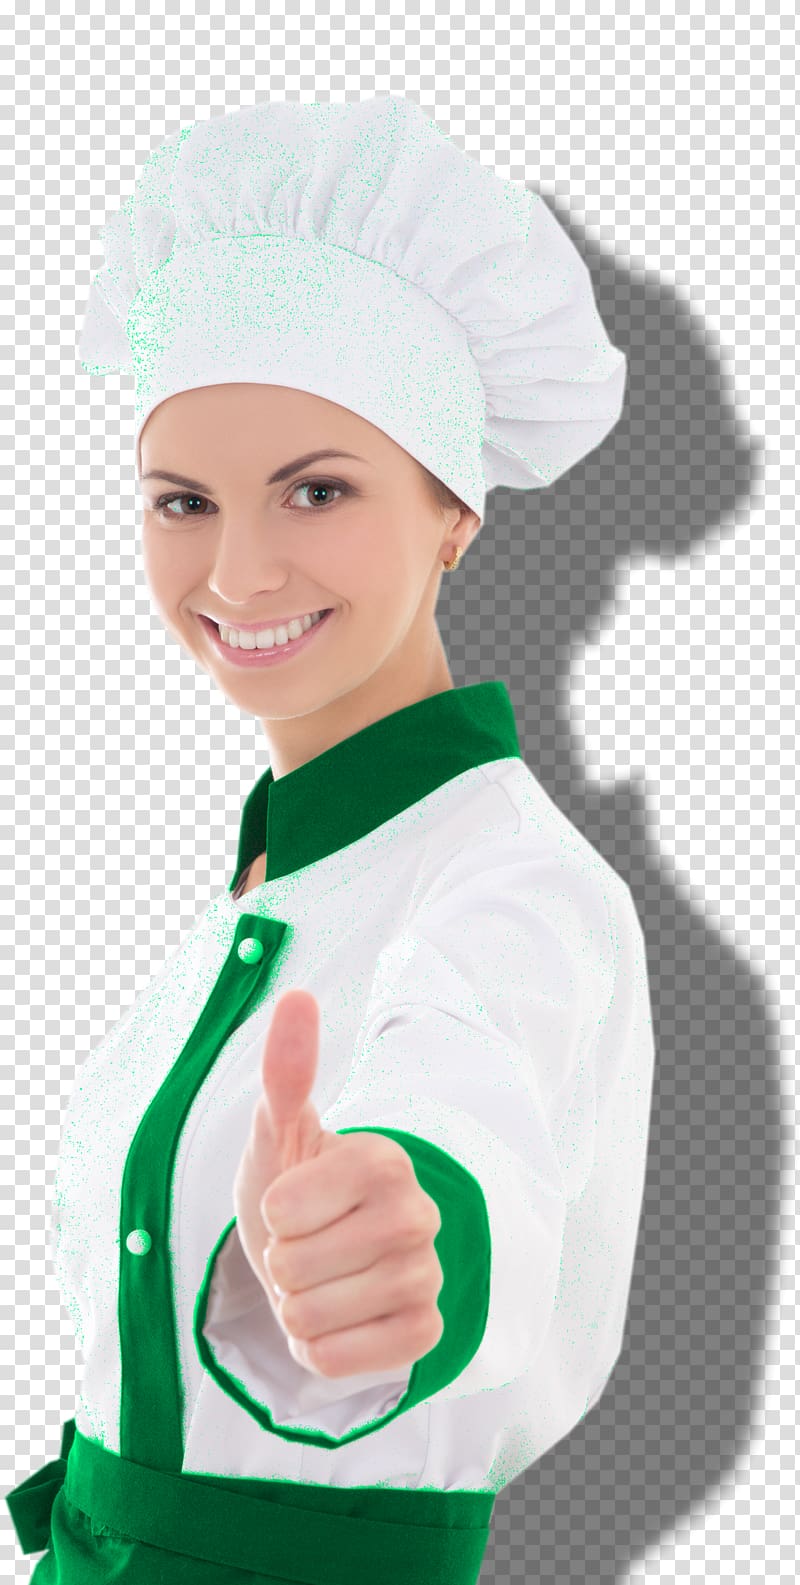 Hat Chief cook Medical glove Cooking, Helal transparent background PNG clipart